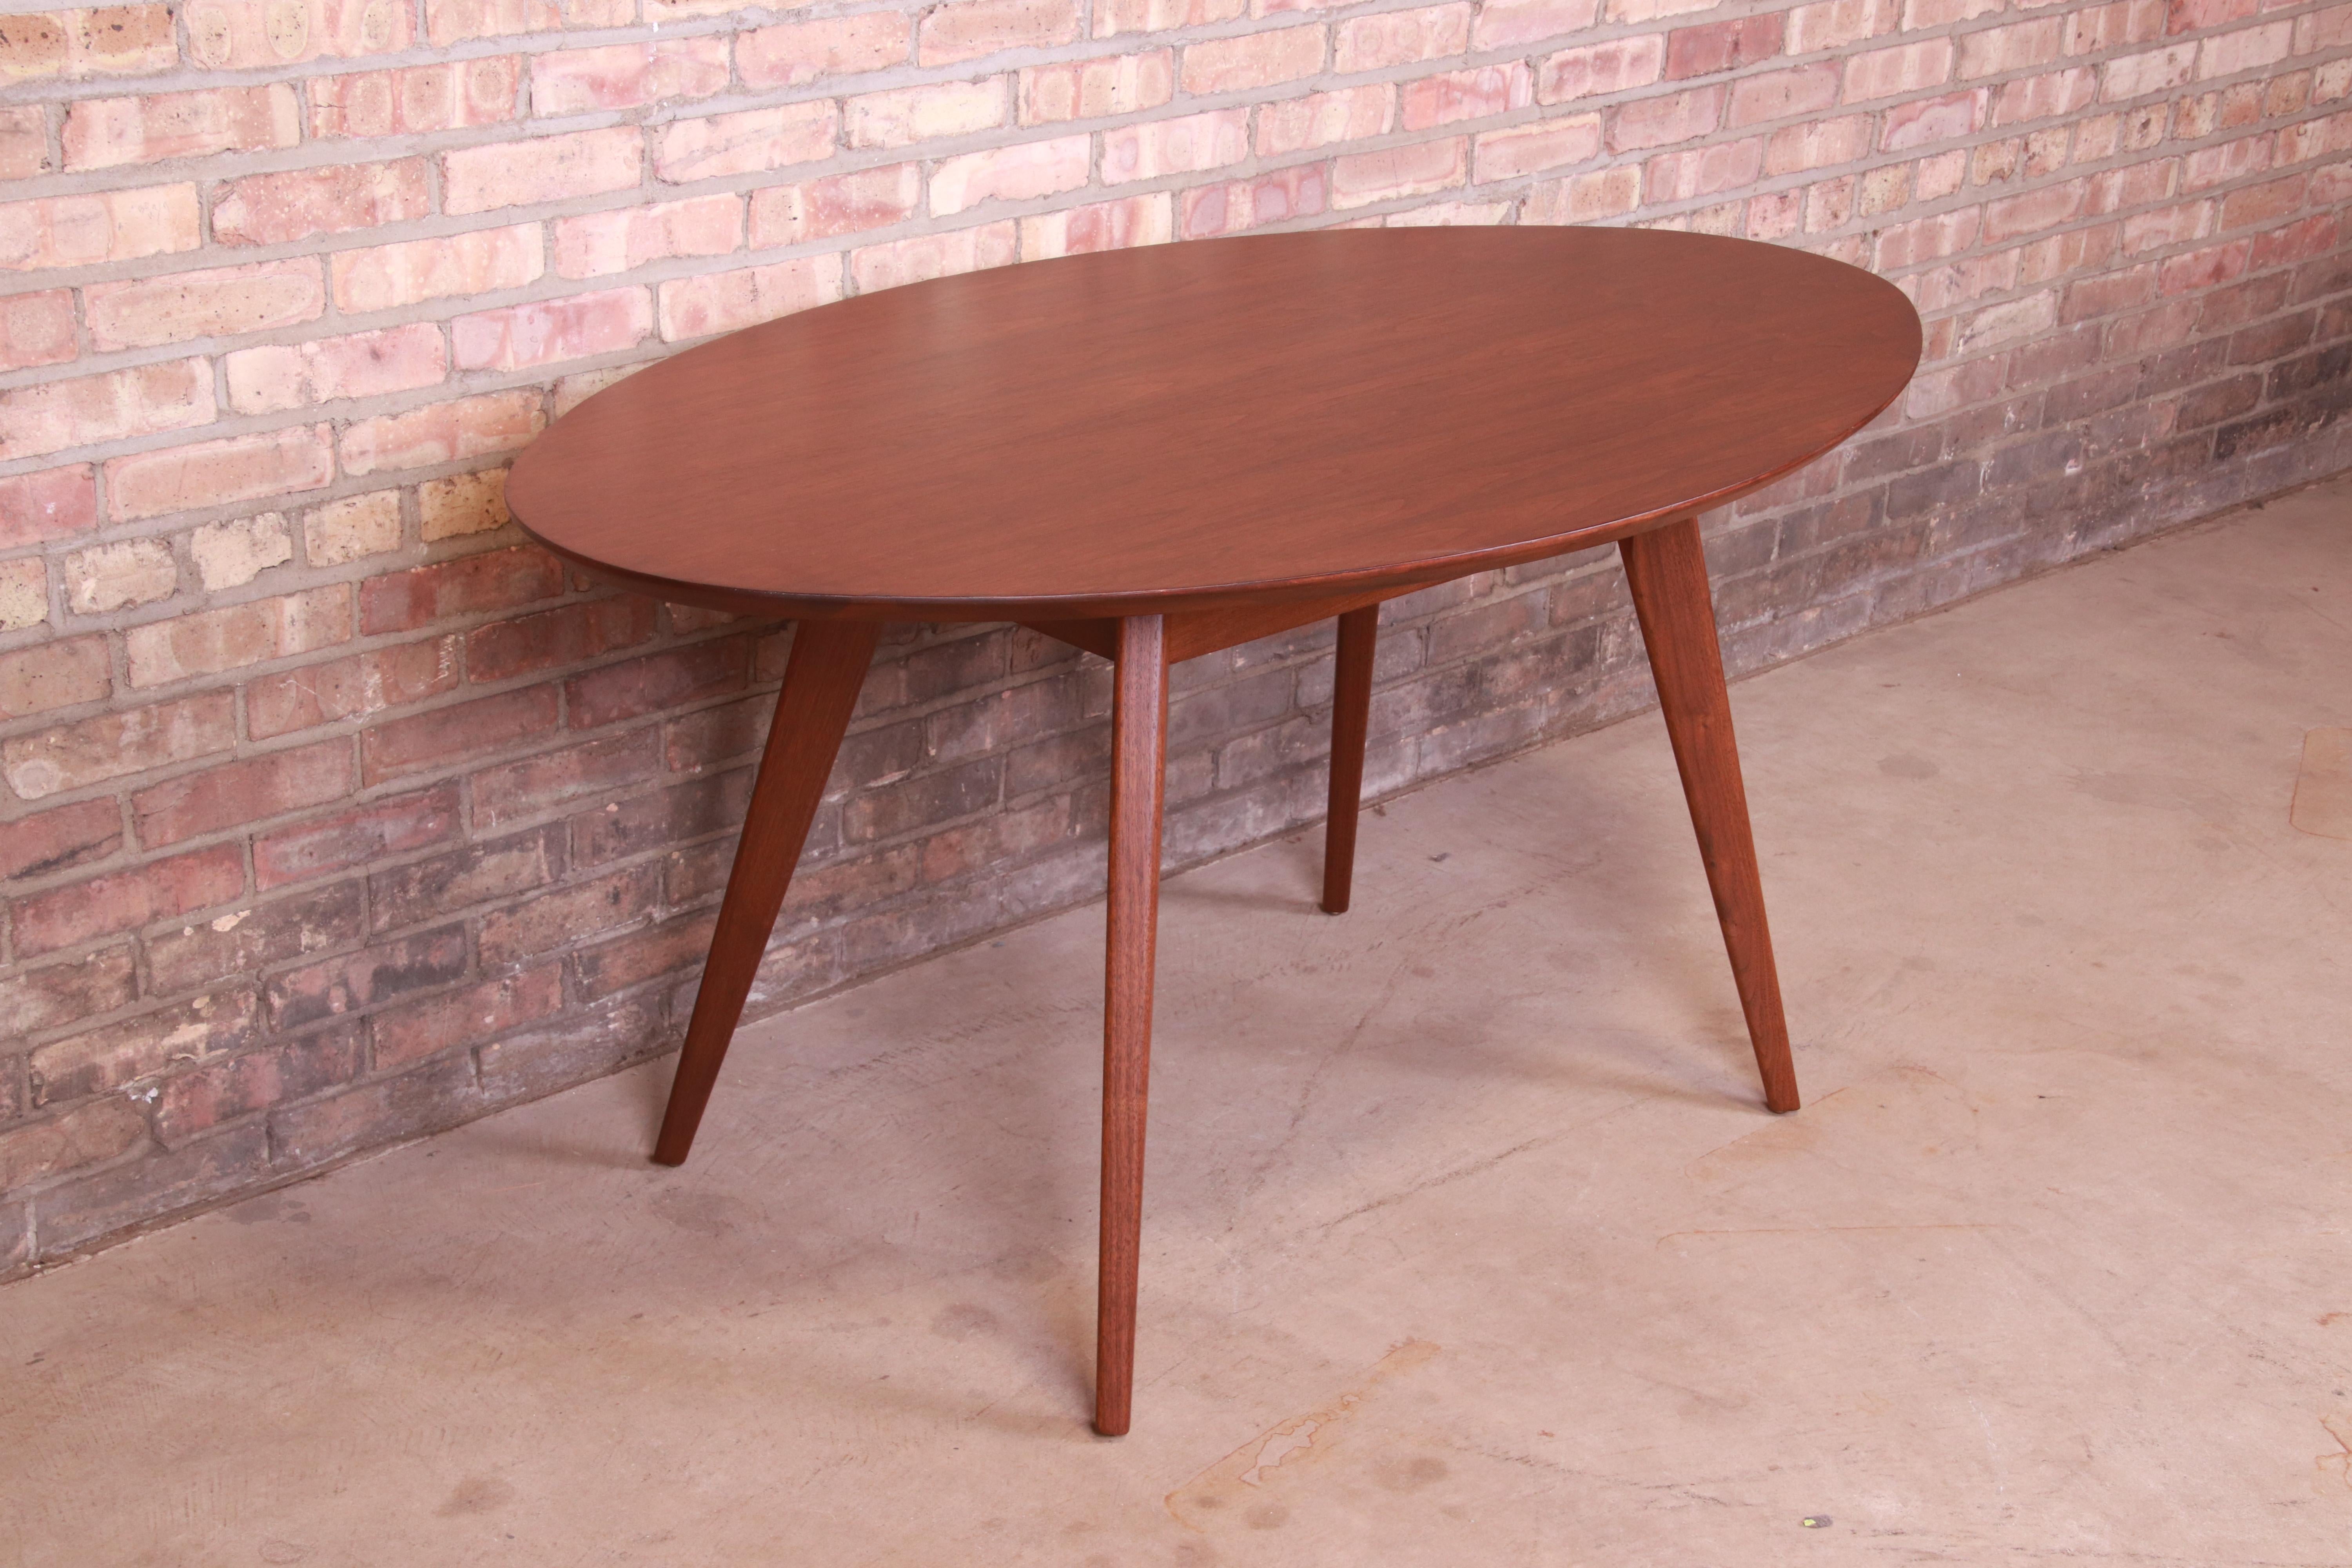 Jens Risom for Knoll Mid-Century Modern Walnut Dining or Game Table, Refinished 1